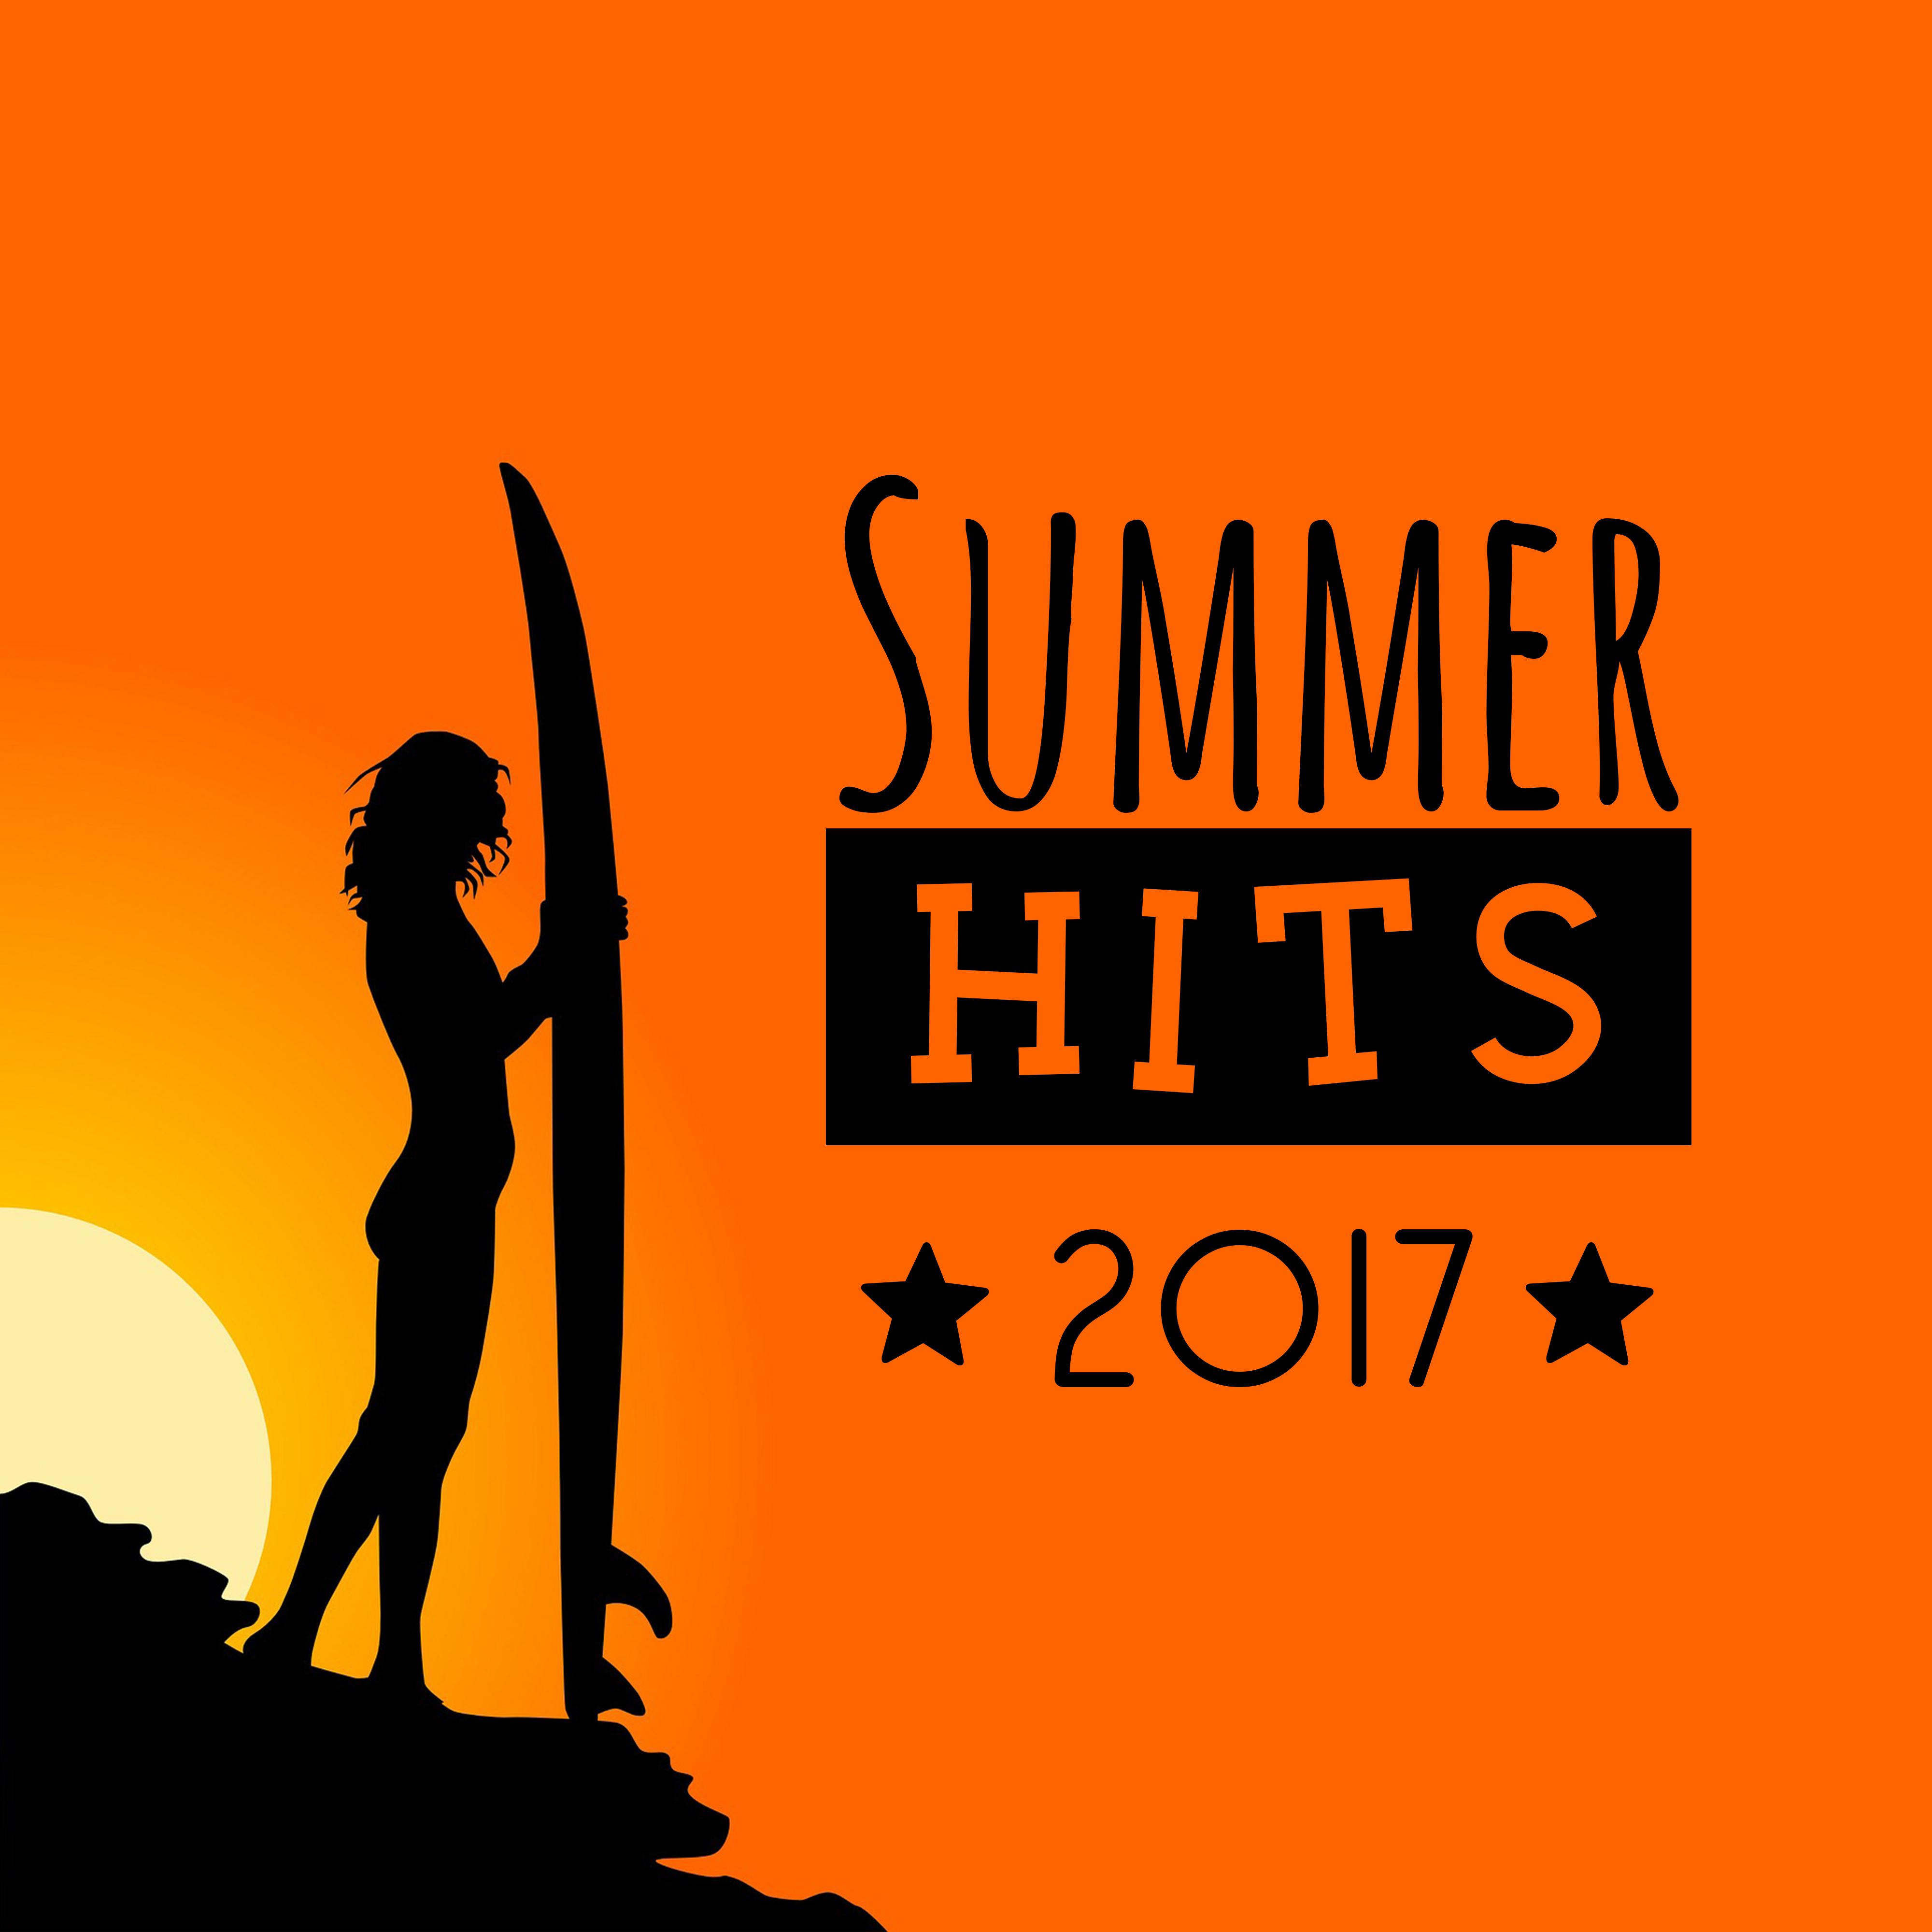 Summer Hits 2017 – Ibiza Beach Party, Hot Music, Chill Out 2017, Ibiza Lounge, **** Vibrations 69, Dance Floor, Pure Relaxation